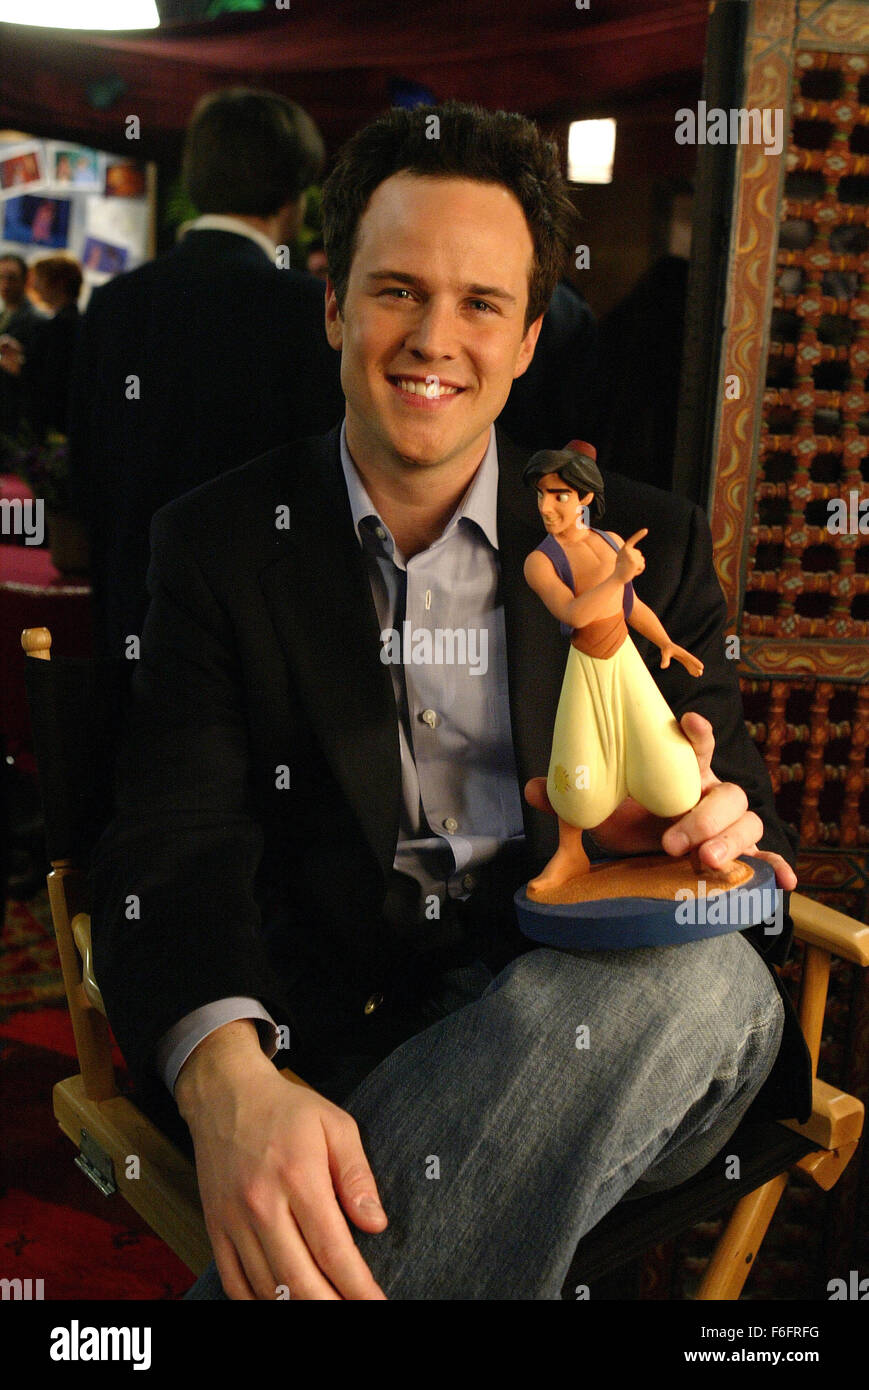 Nov 11, 1992; Los Angeles, CA, USA; SCOTT WEINGER as the voice of Aladdin in the animated family musical comedy 'Aladdin' directed by Ron Clements. Stock Photo